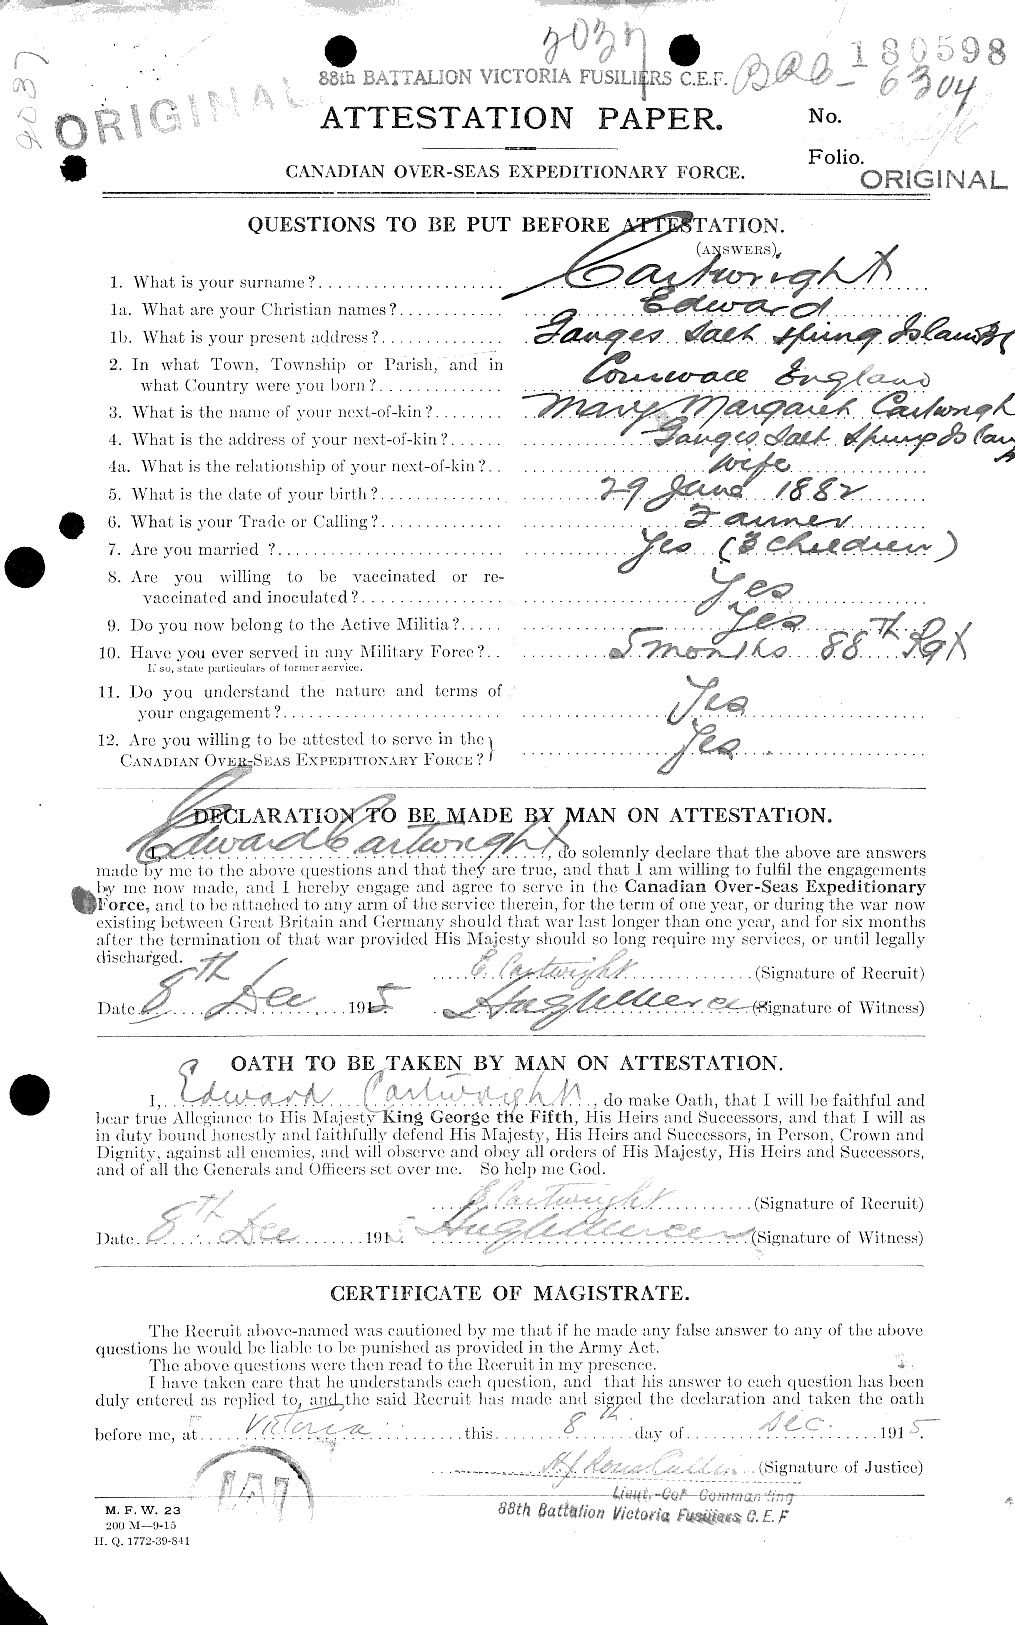 Personnel Records of the First World War - CEF 011564a